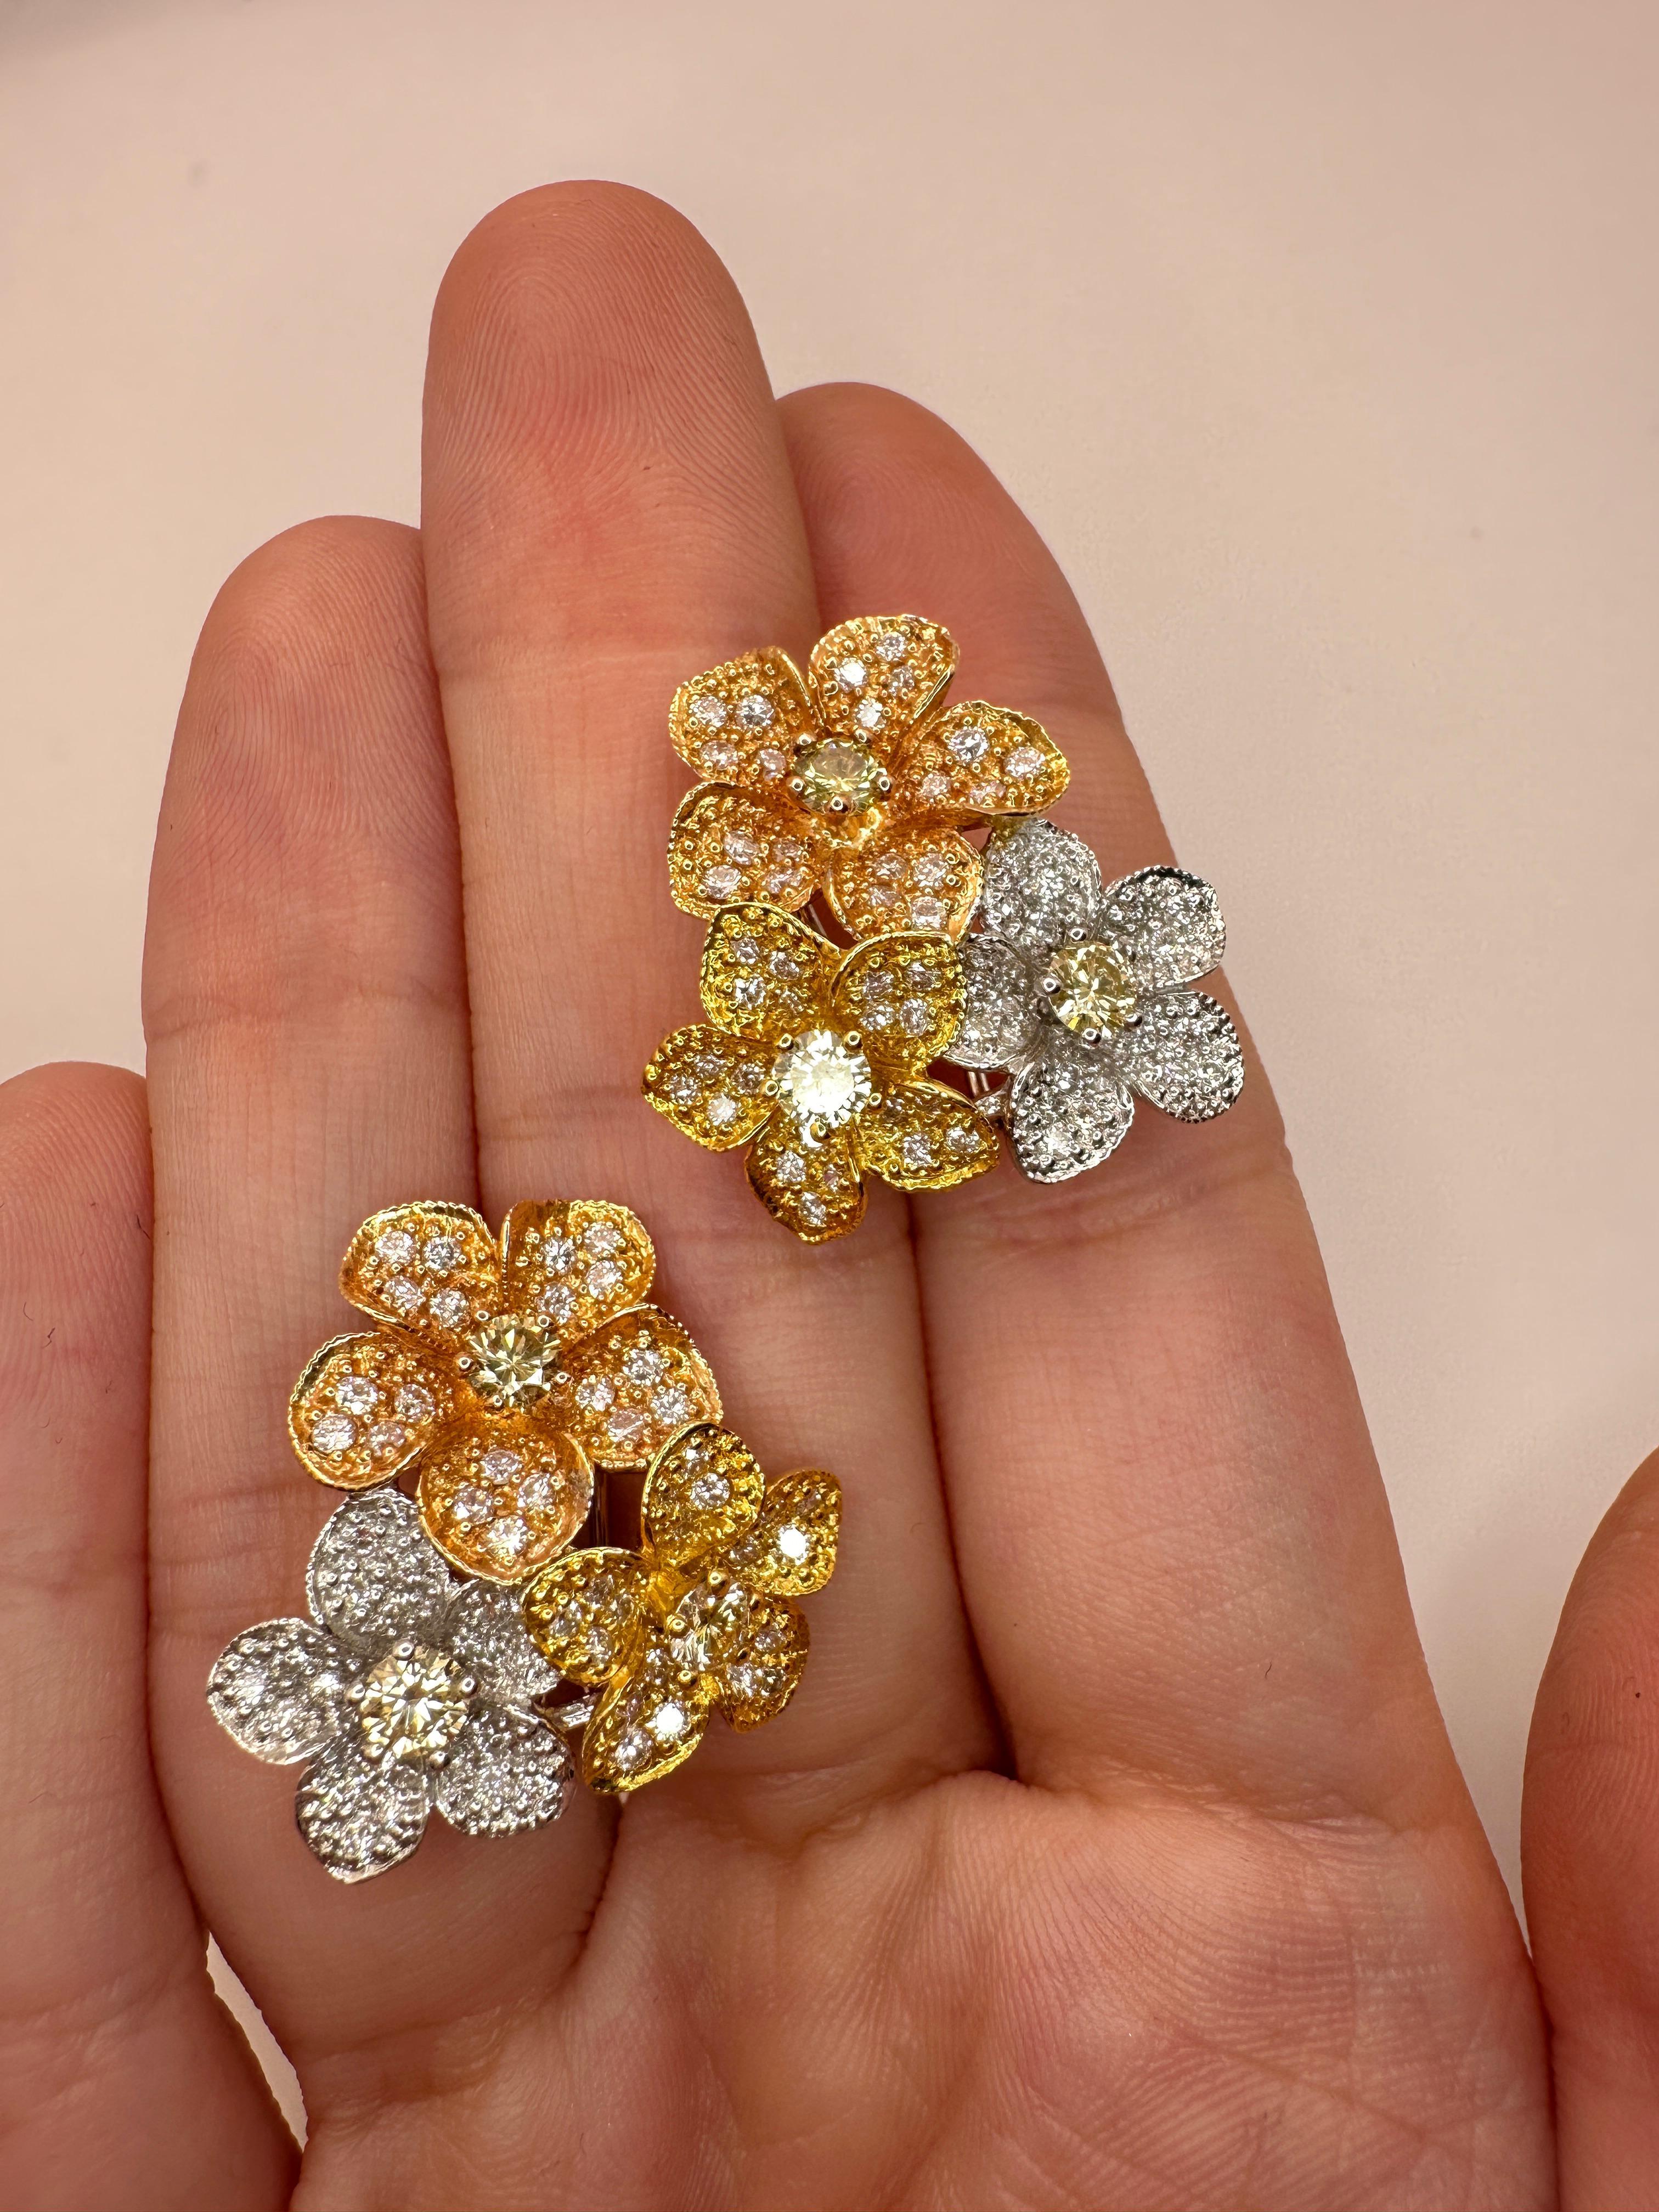 18k Diamond Floral Earrings In Good Condition For Sale In New York, NY